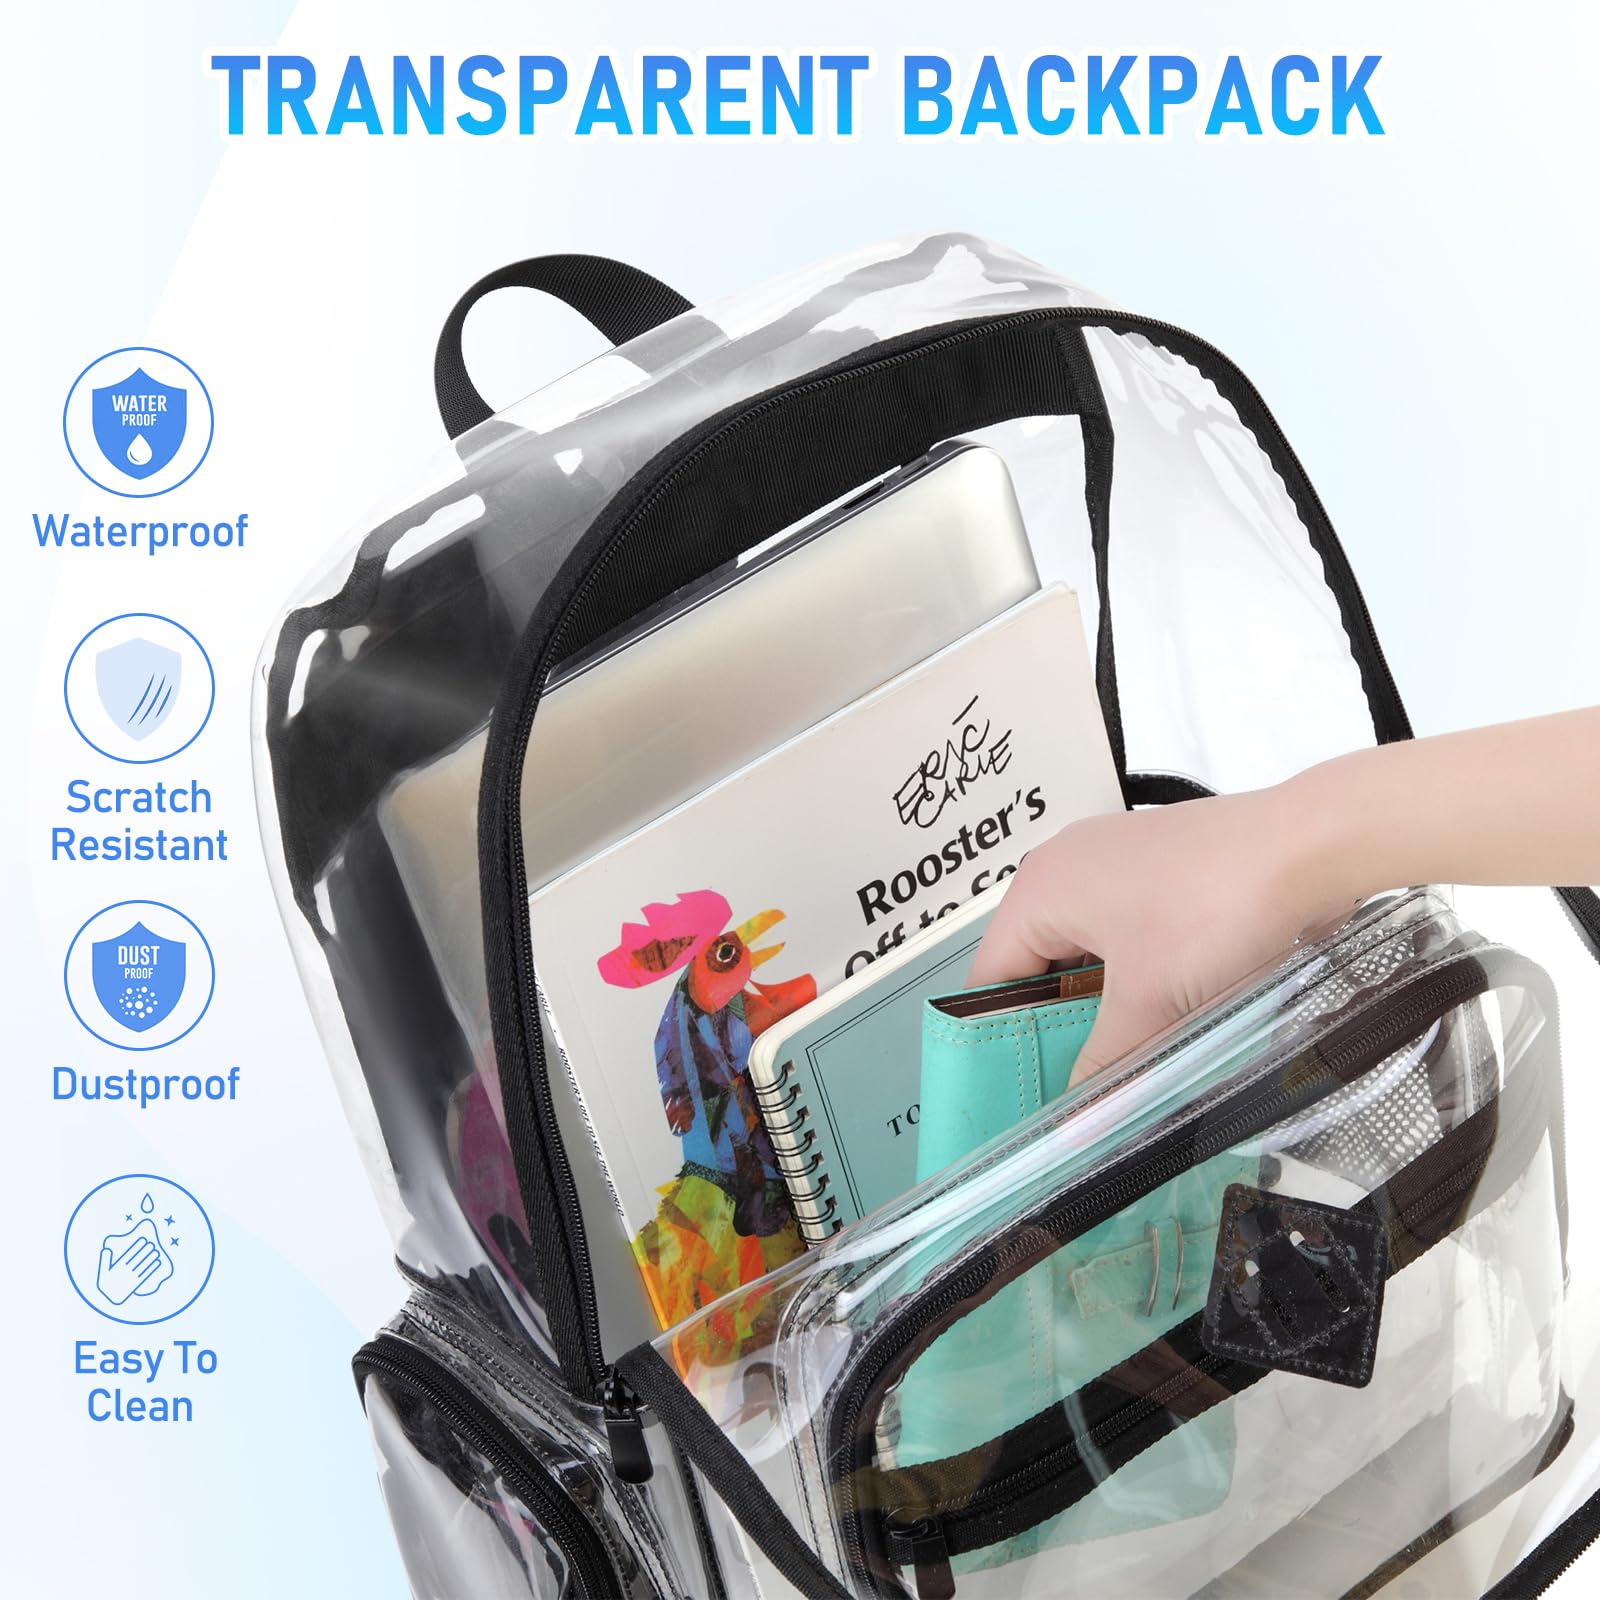 Chase Chic Clear Backpack Stadium Approved Transparent School Backpack Large Heavy Duty See Through Daypack for School Work Travel